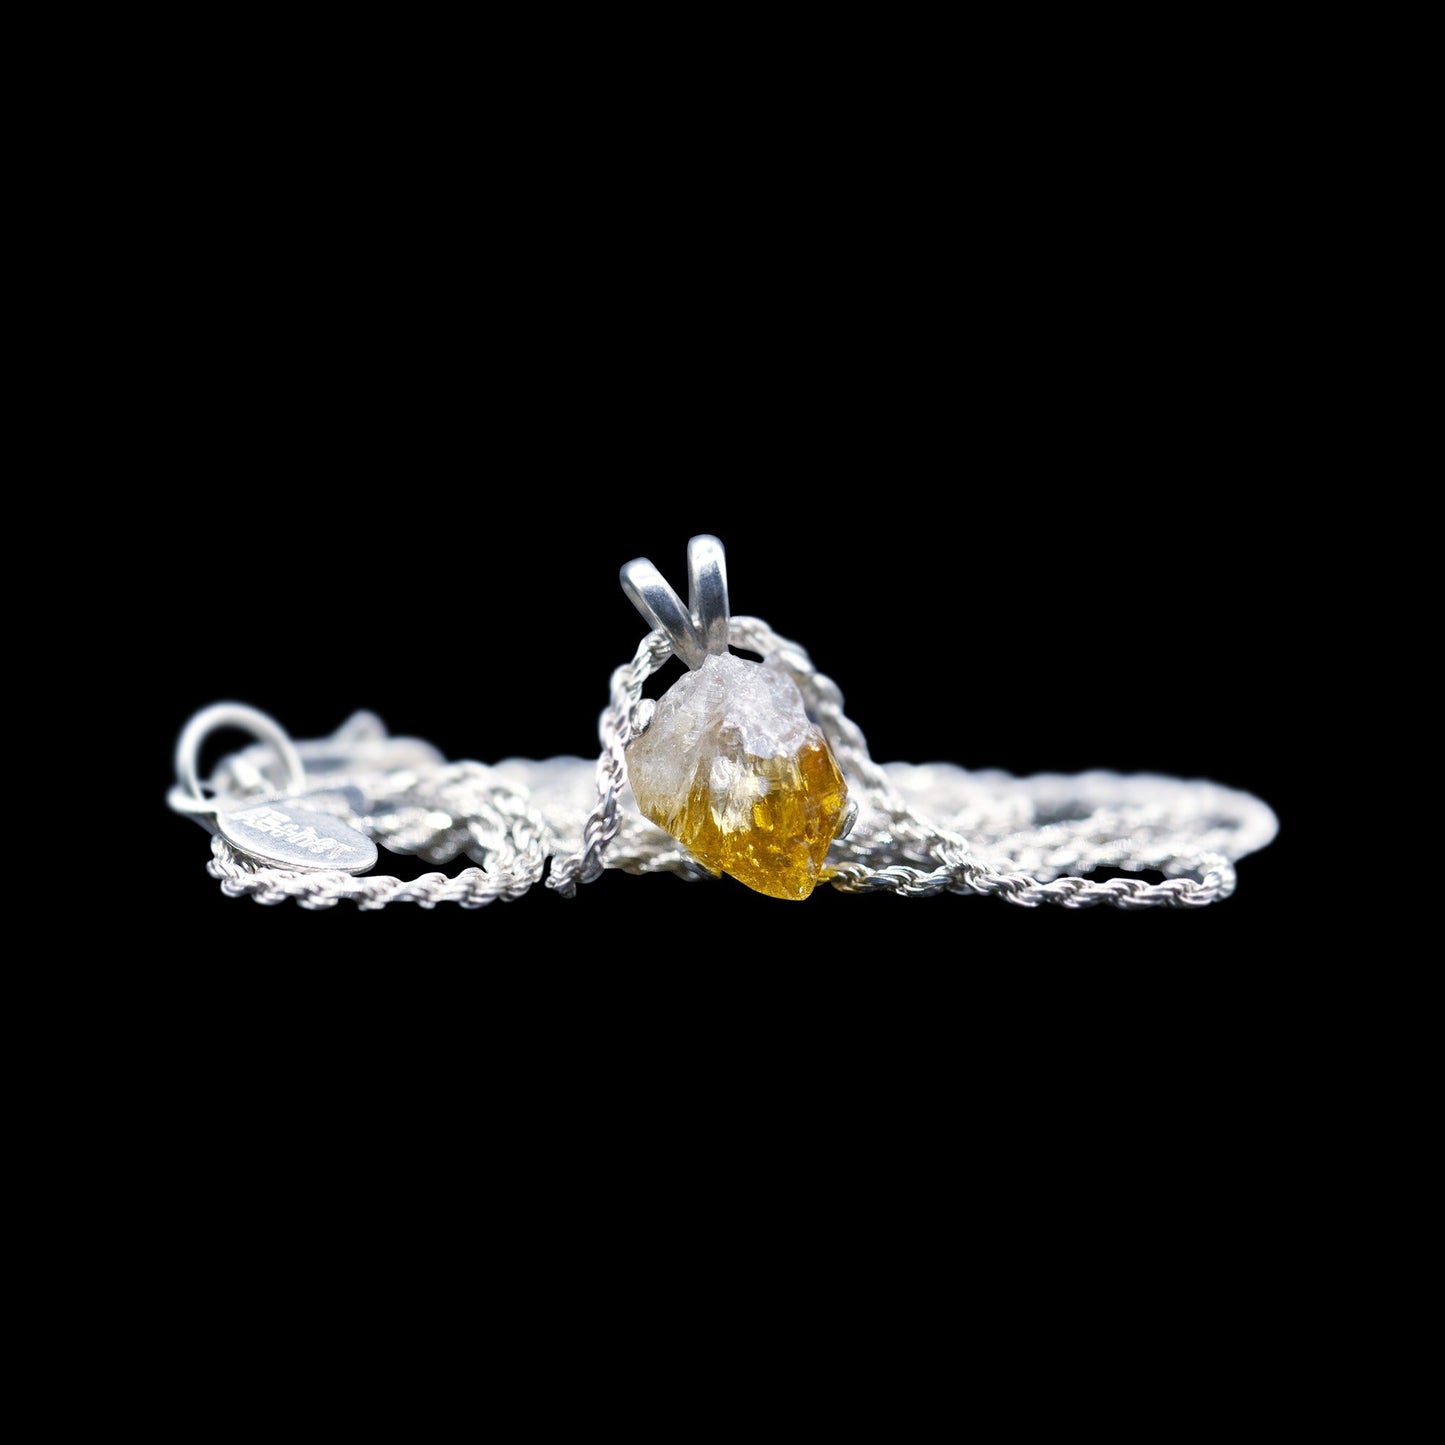 Raw Citrine Solitaire on Sterling Silver Rope